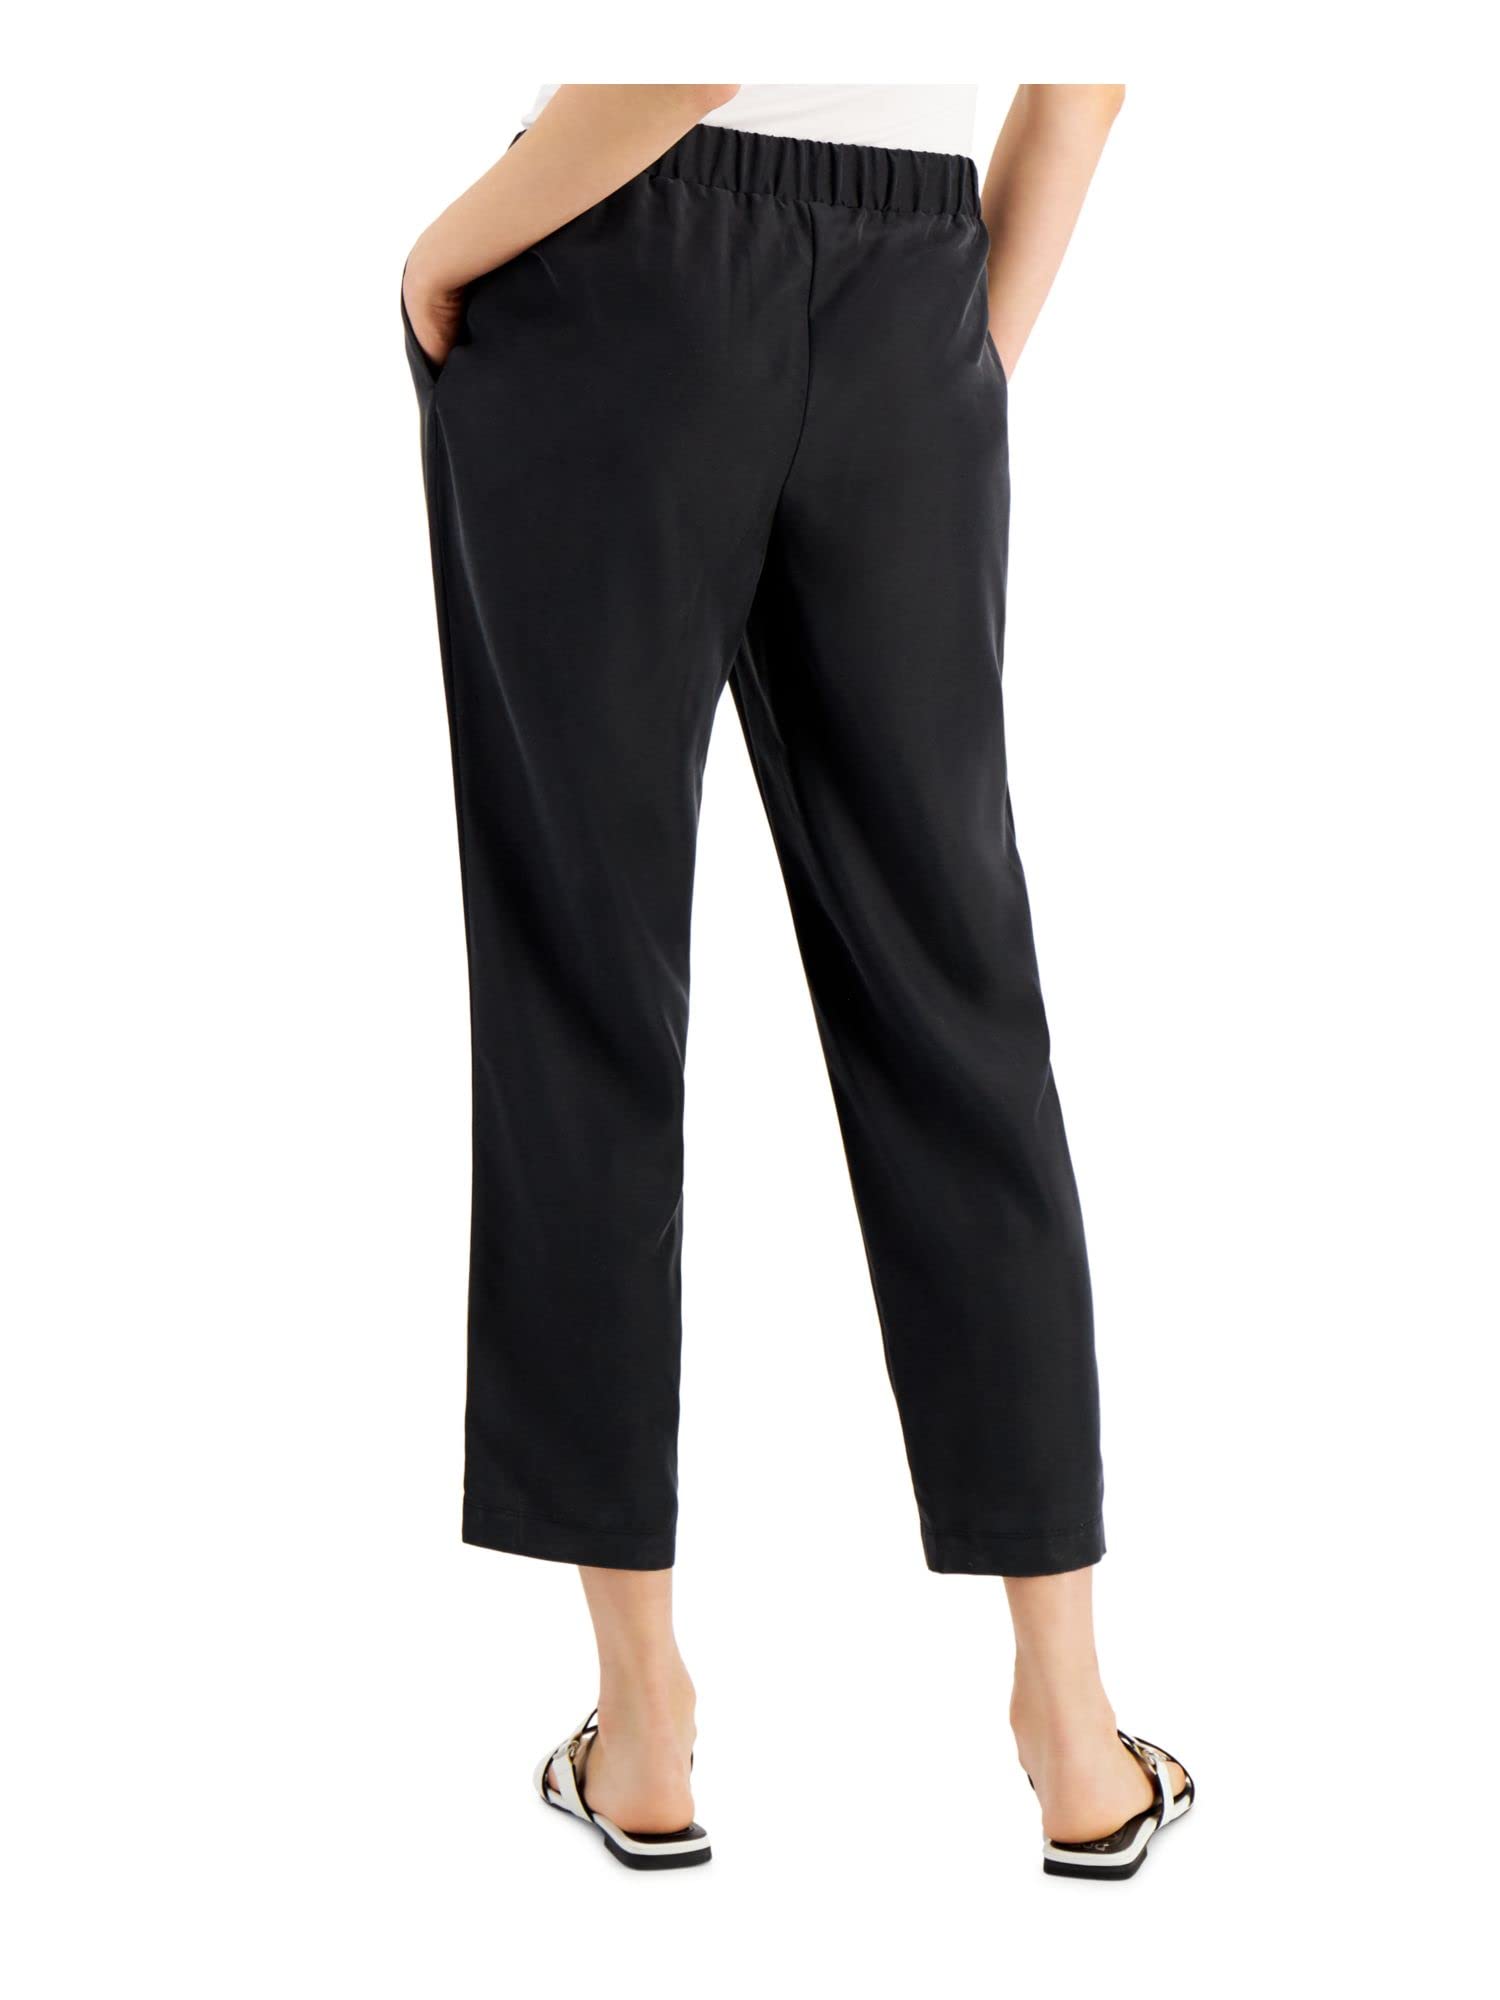 Alfani Womens Solid Pull-On Ankle Casual Trouser Pants